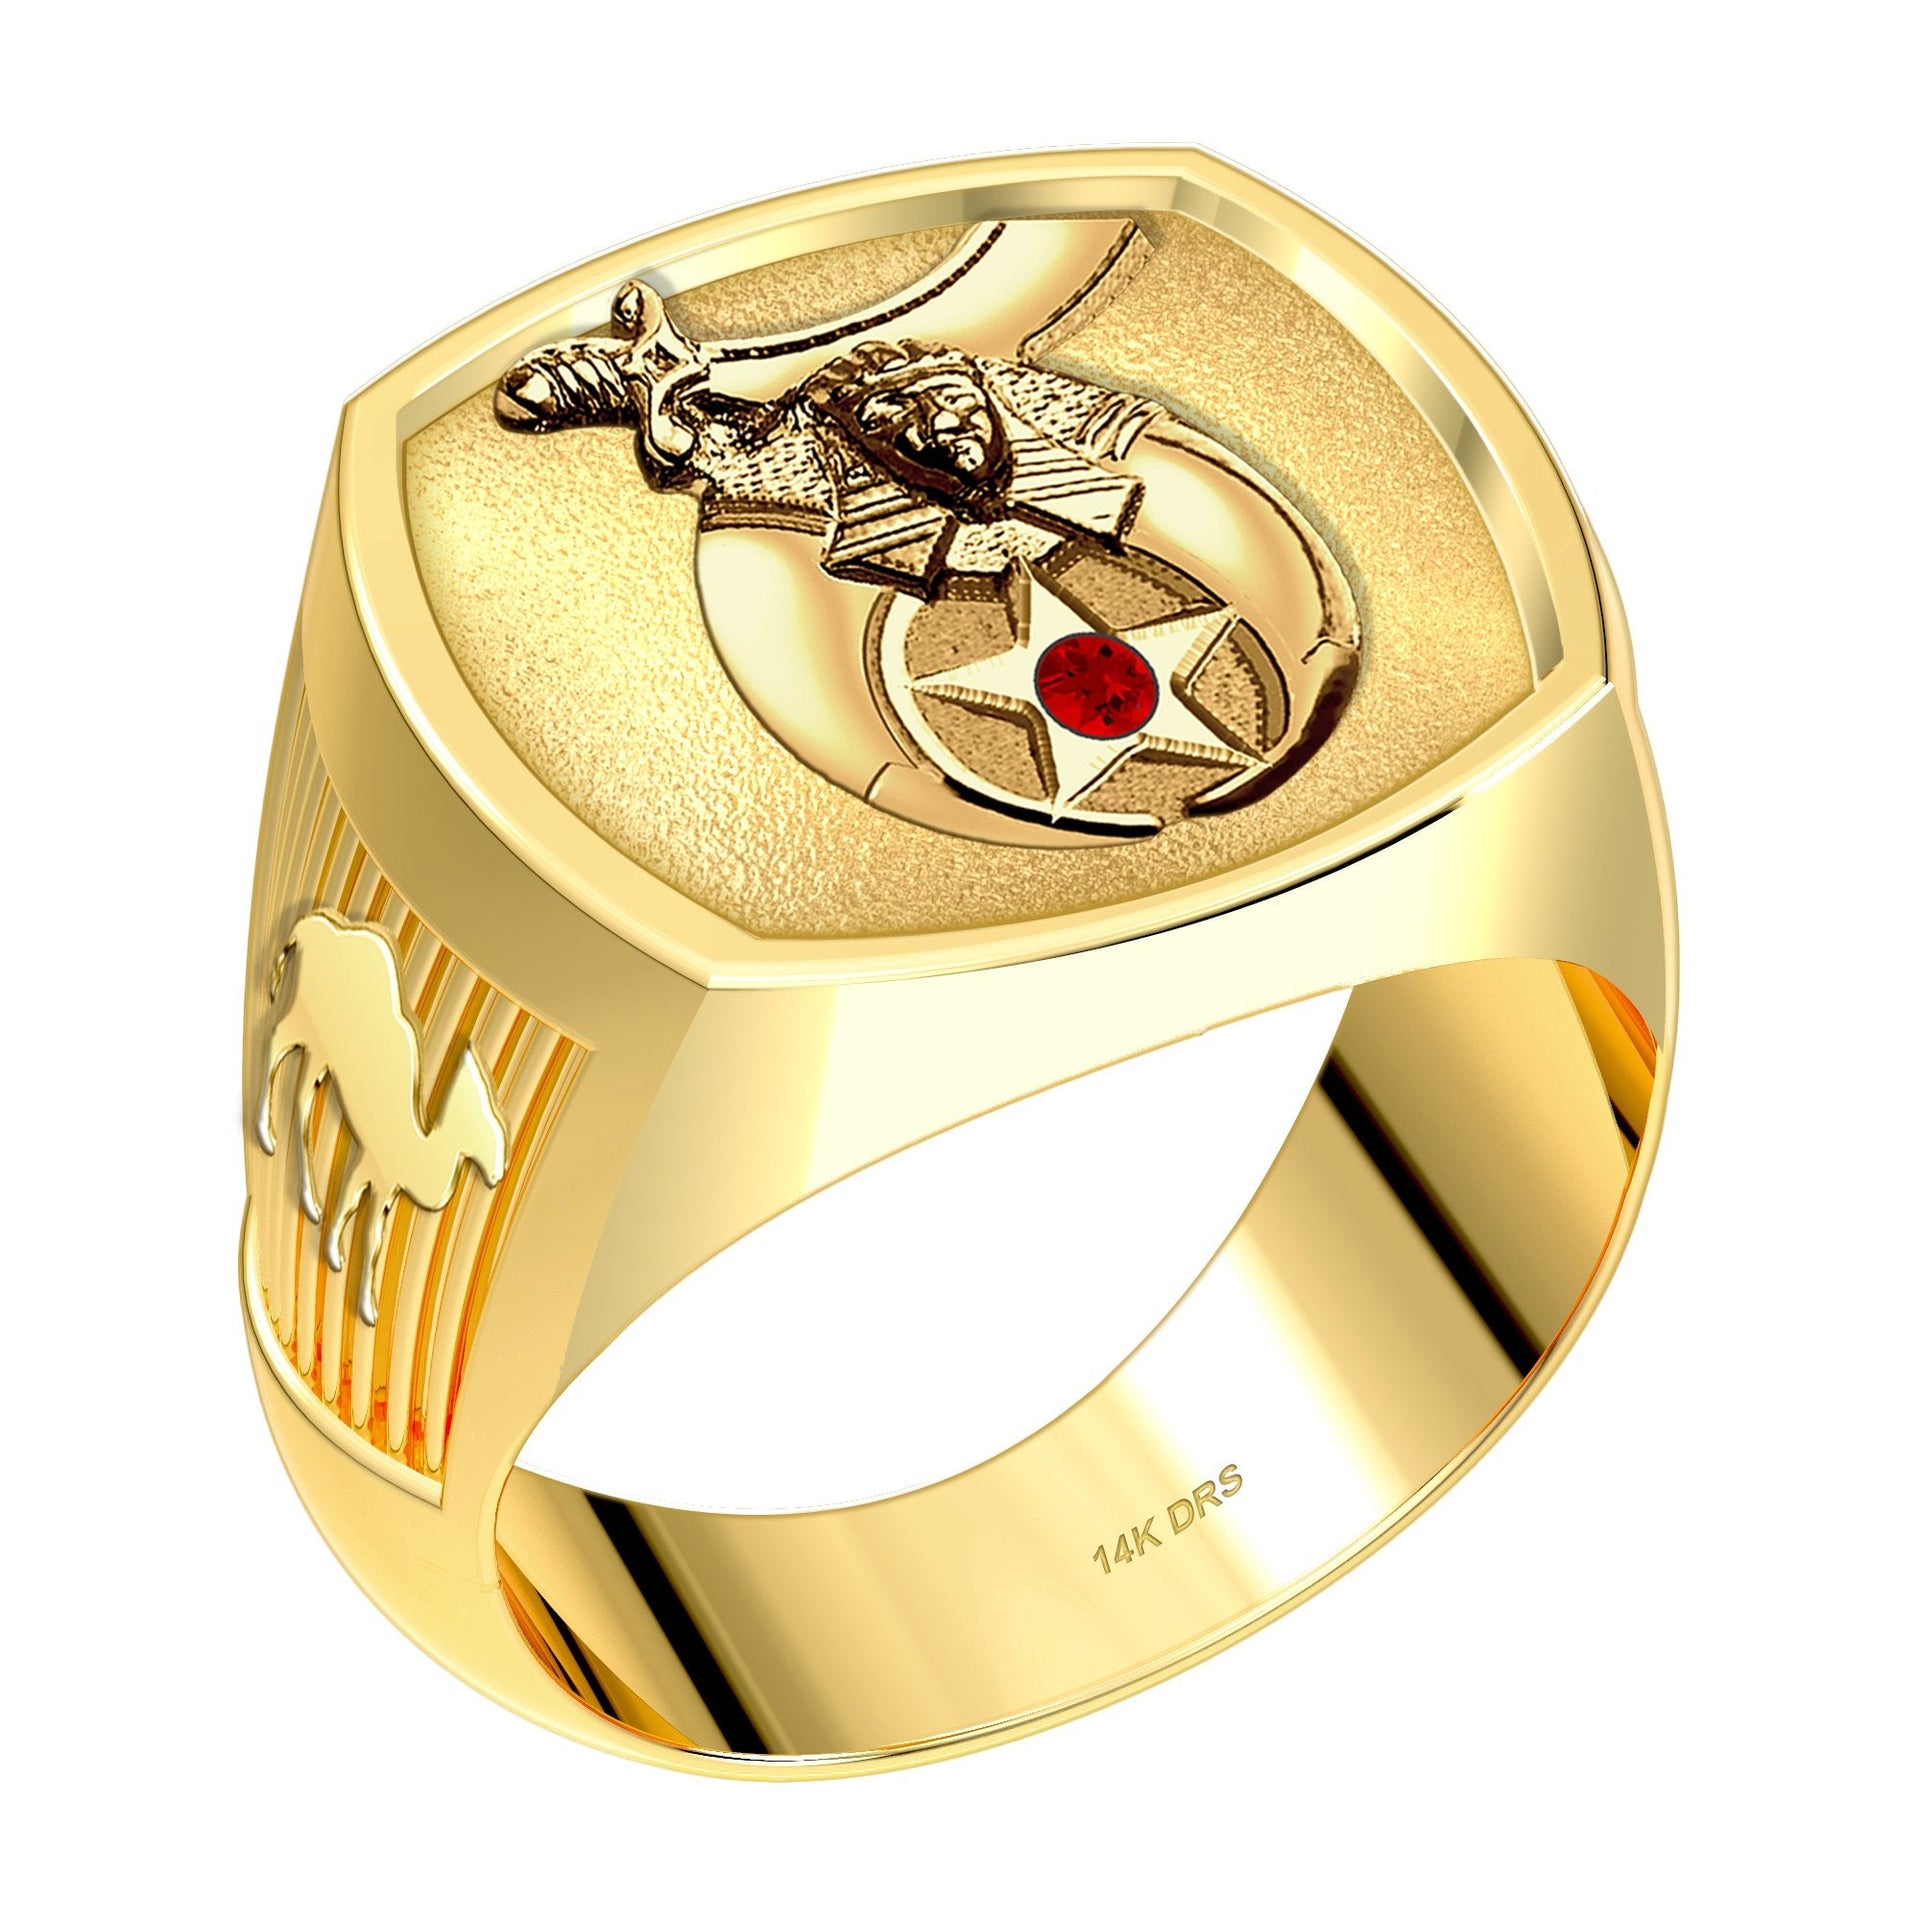 Customizable Men's 10k or 14k White or Yellow Gold Masonic Solid Back Ring - US Jewels